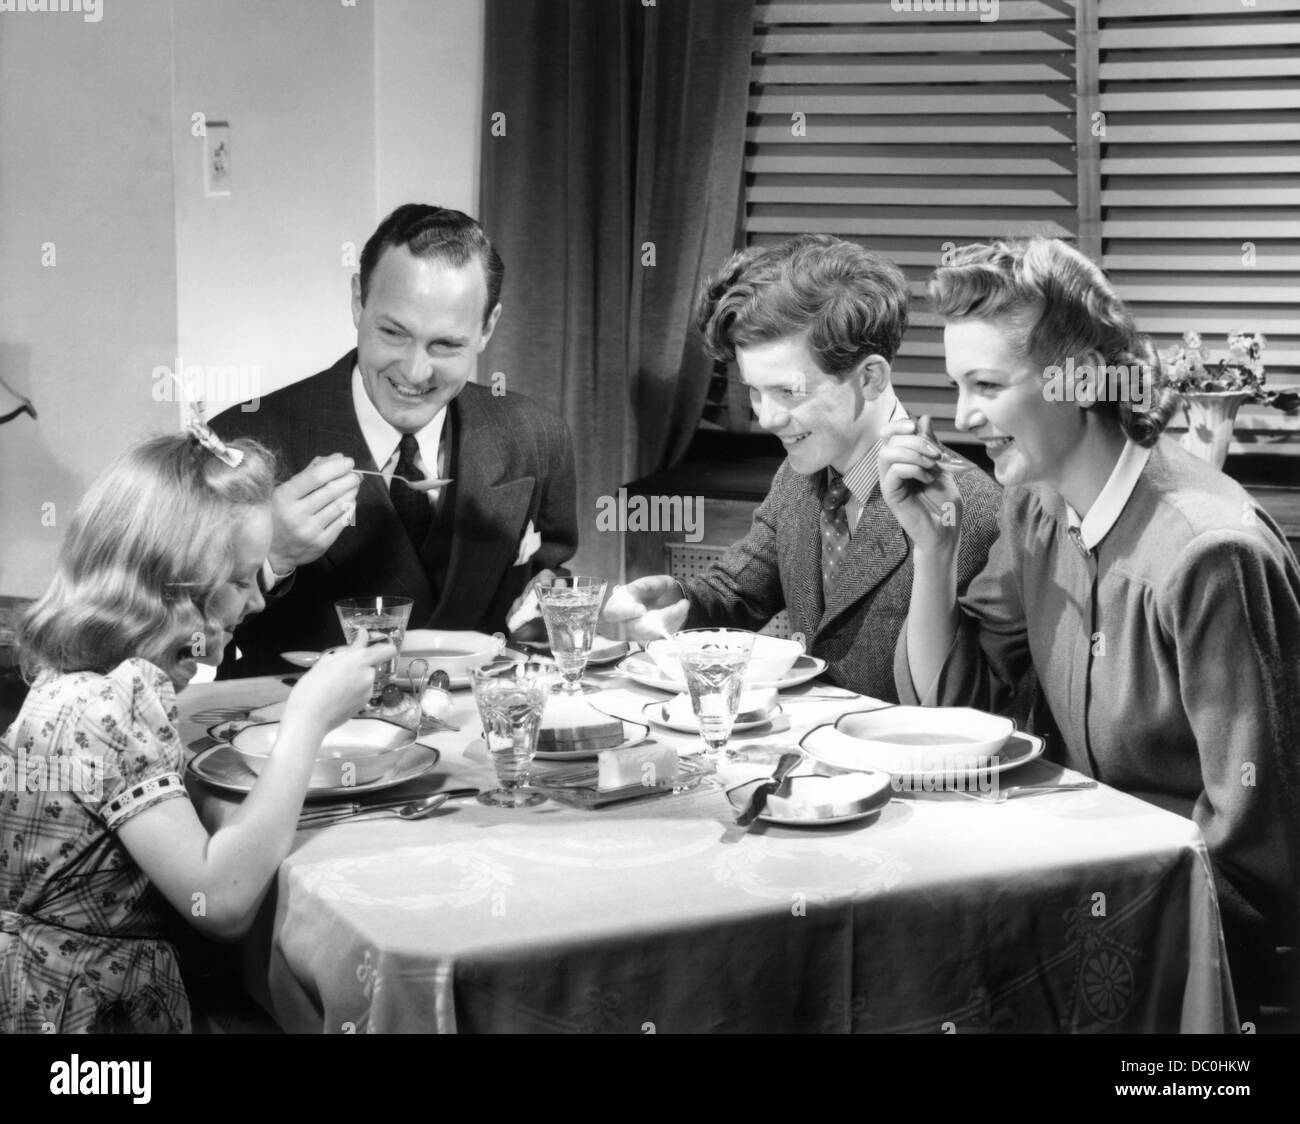 1930s 1940s HAPPY FAMILY EATING DINNER AT HOME Stock Photo